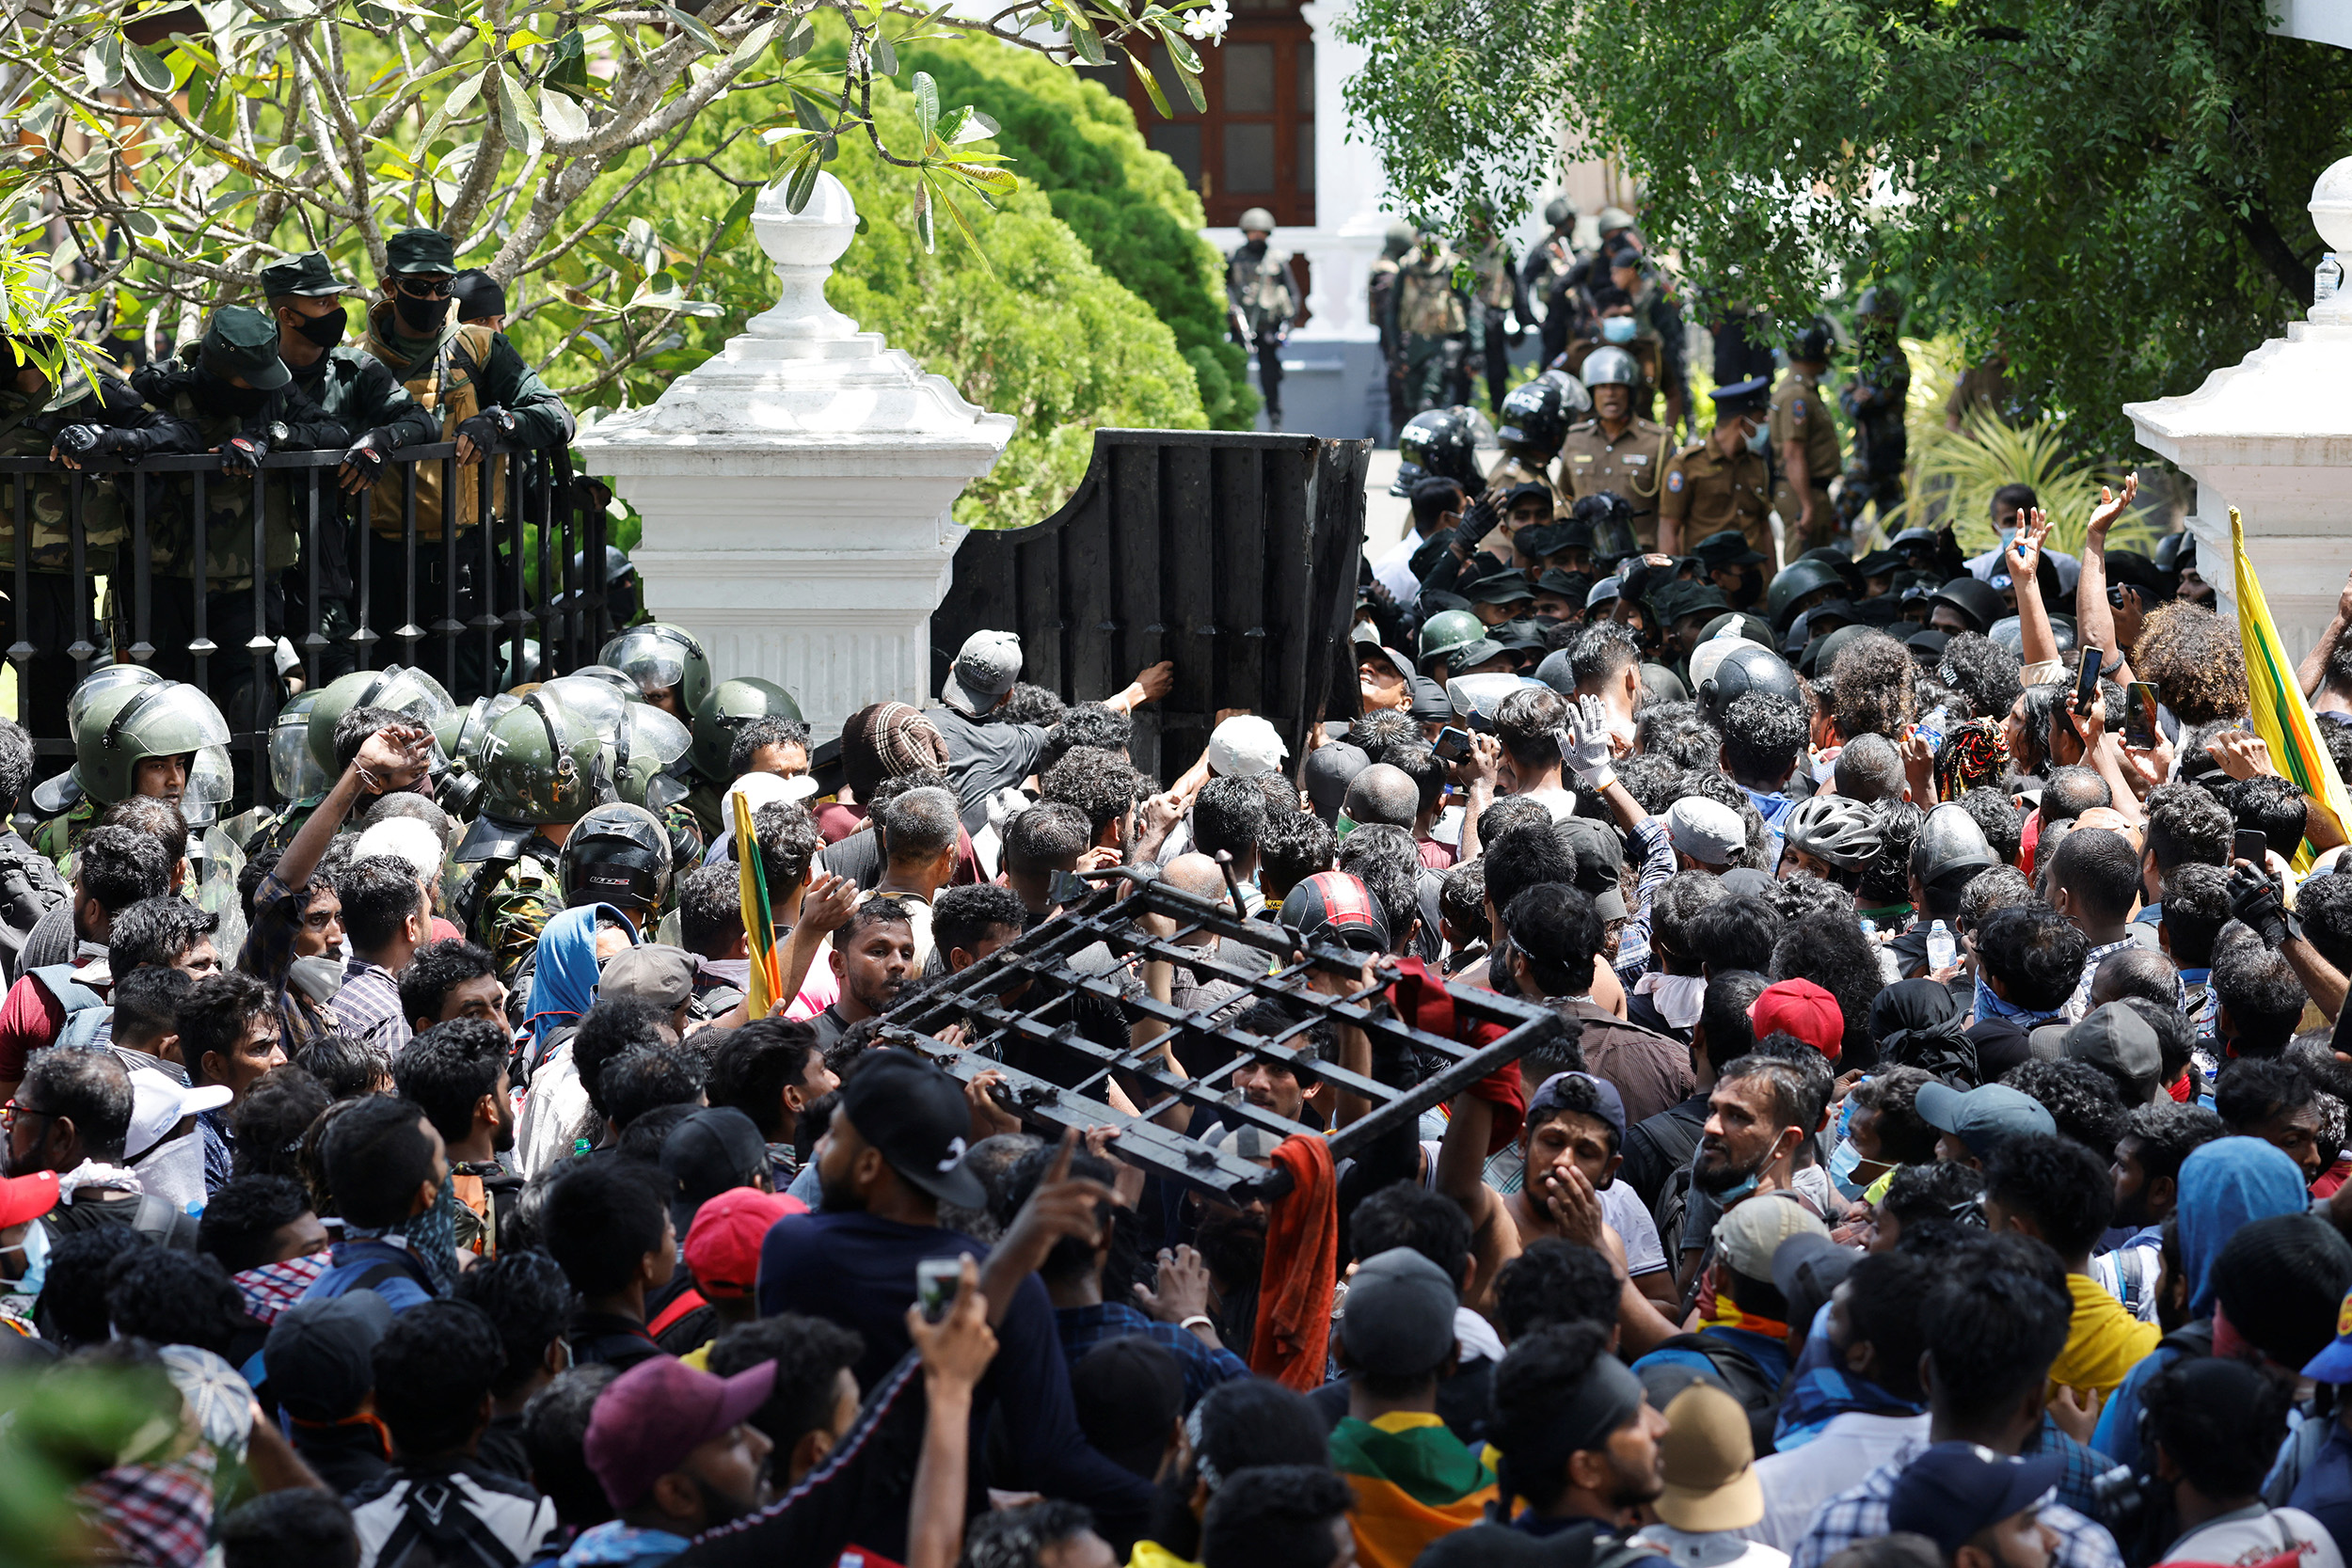 Demonstrators carry the gate to Sri Lanka's Prime Minister Ranil Wickremesinghe's office during a protest in Colombo, Sri Lanka, on July 13.